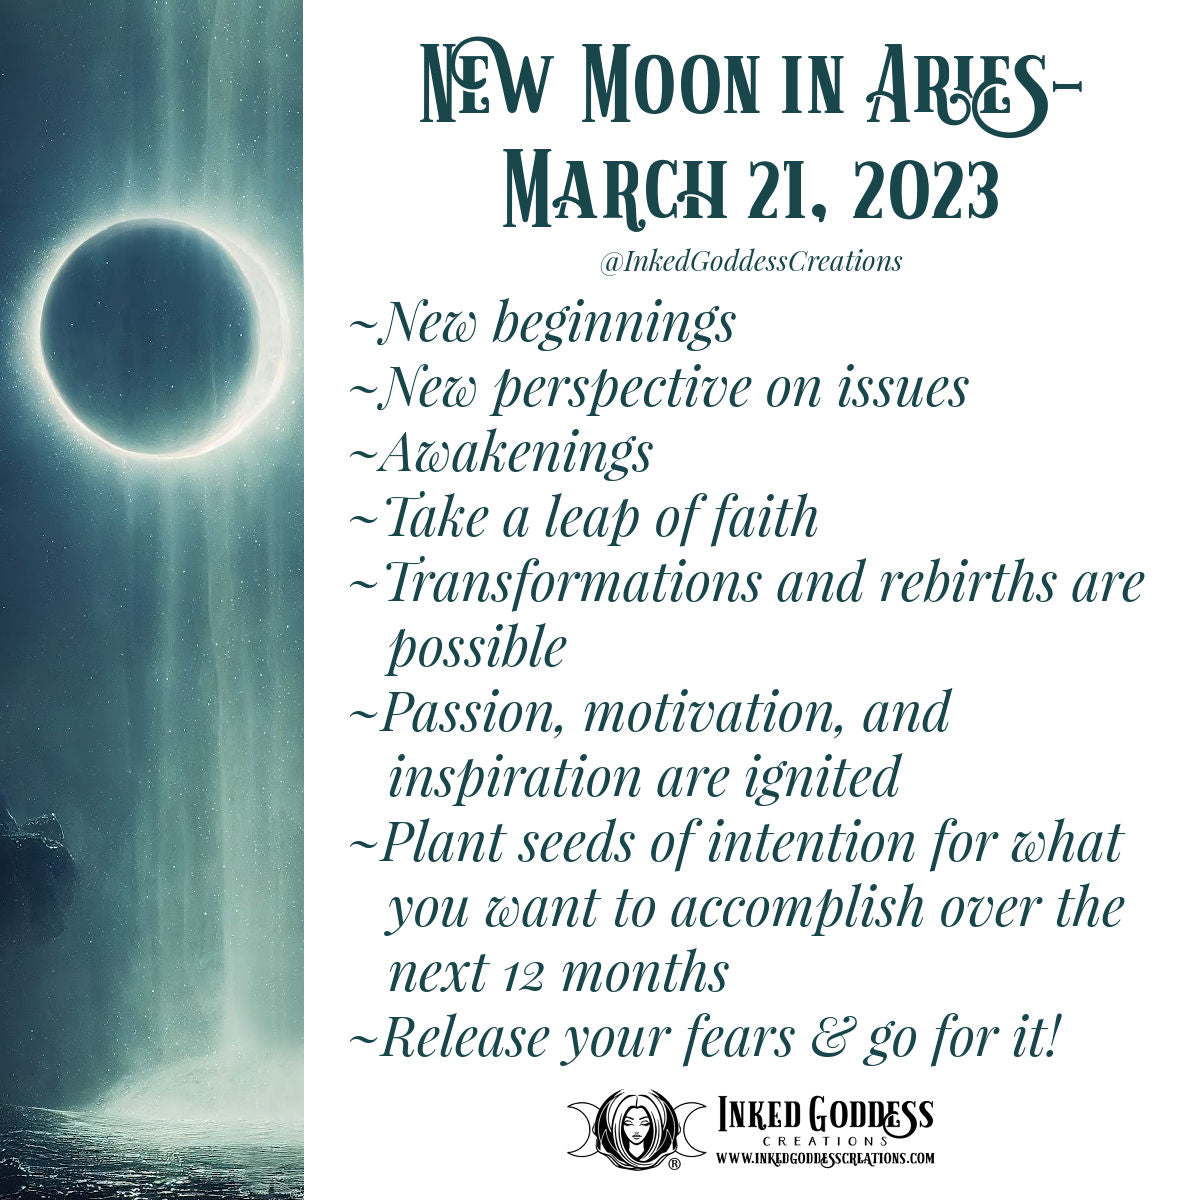 New Moon in Aries- March 21, 2023